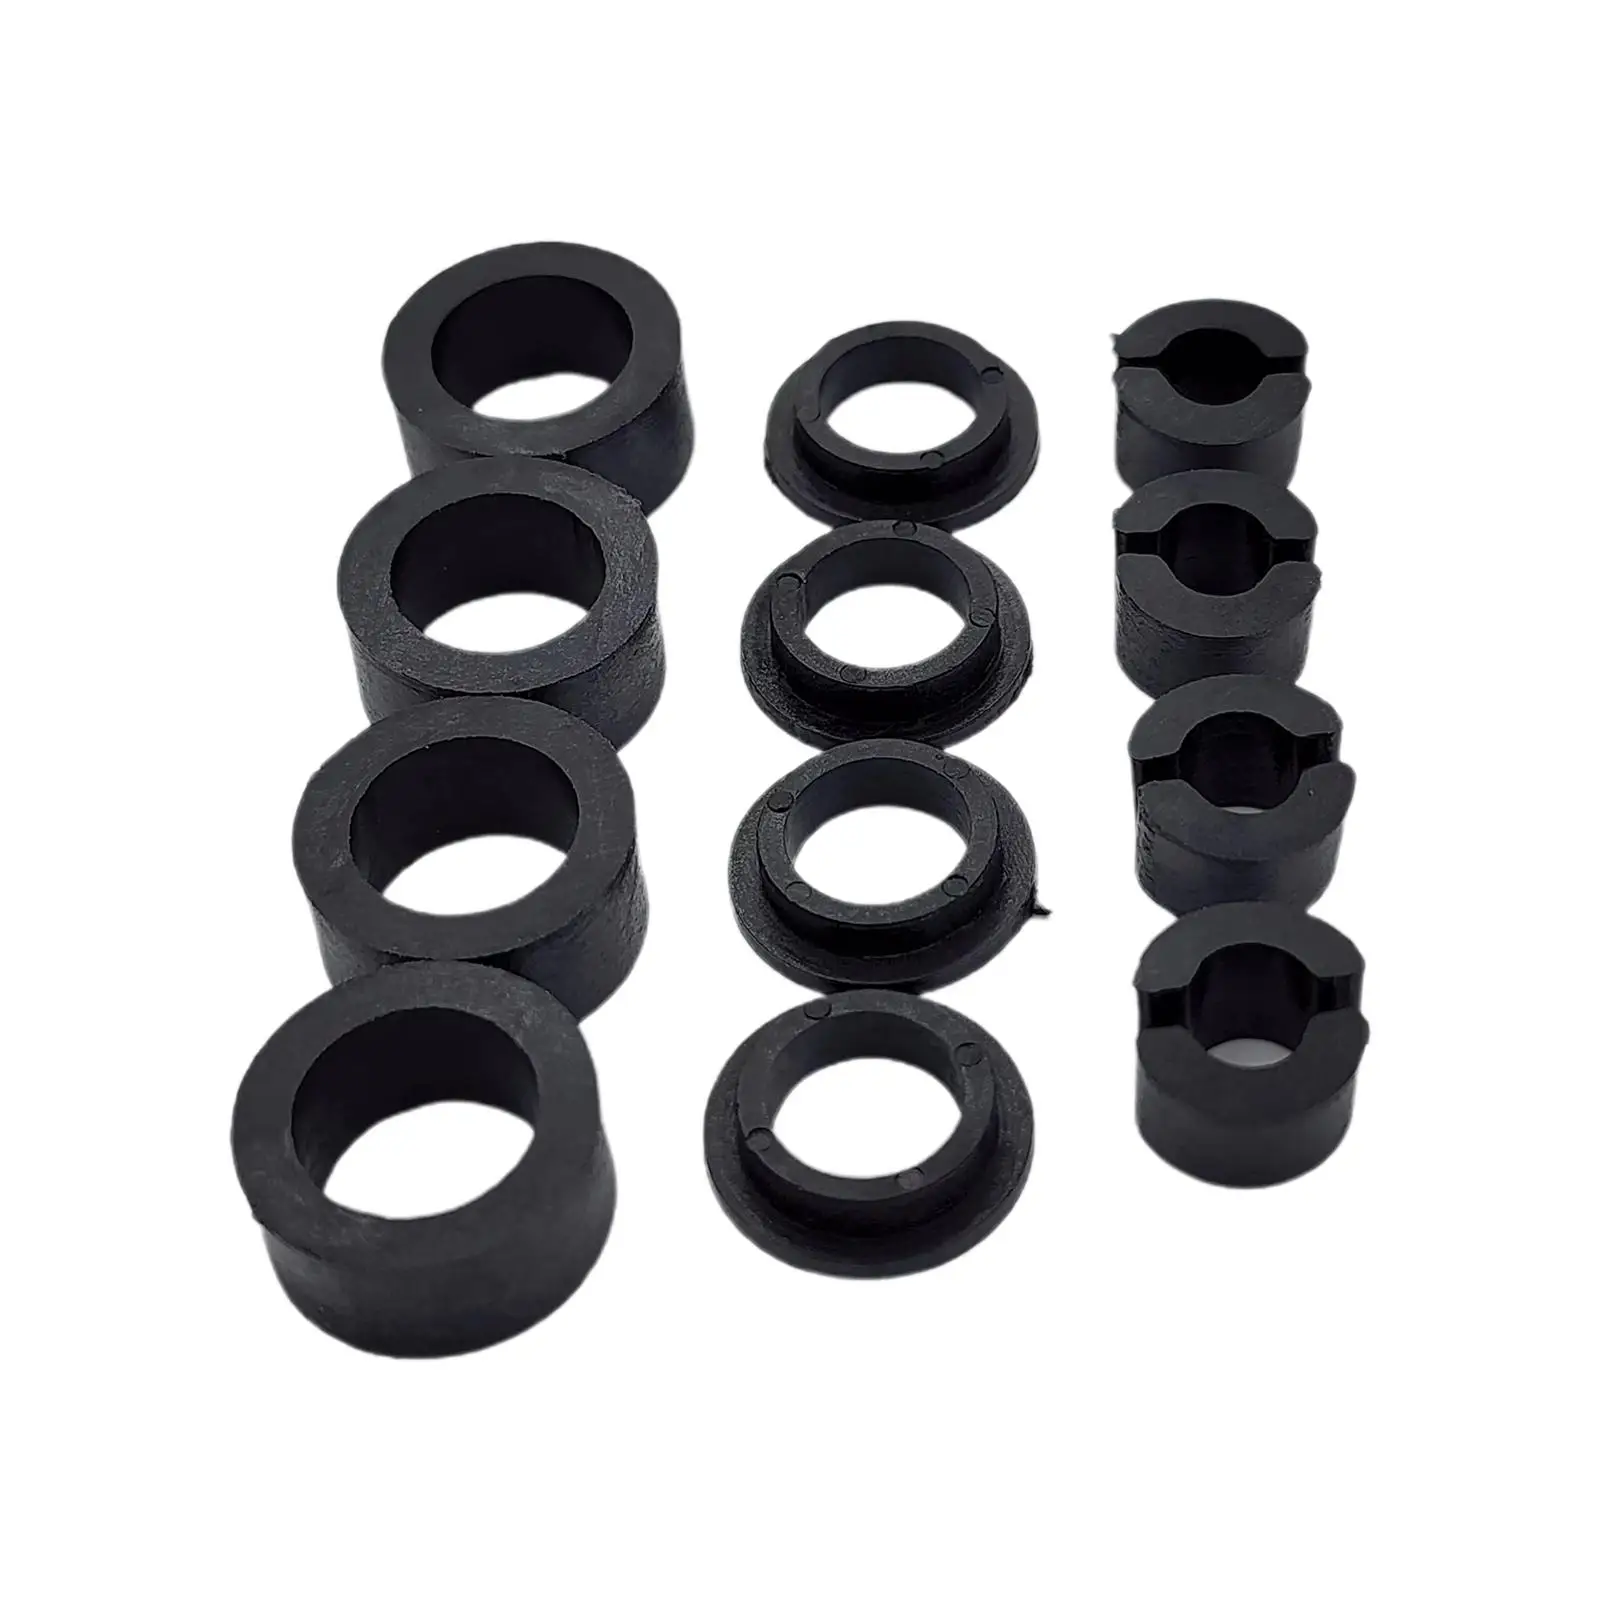 Front Seat Slider Support Bushings Wobbly Loose Seat Fix for TJ Lj 1998-2006 Parts Professional Accessories